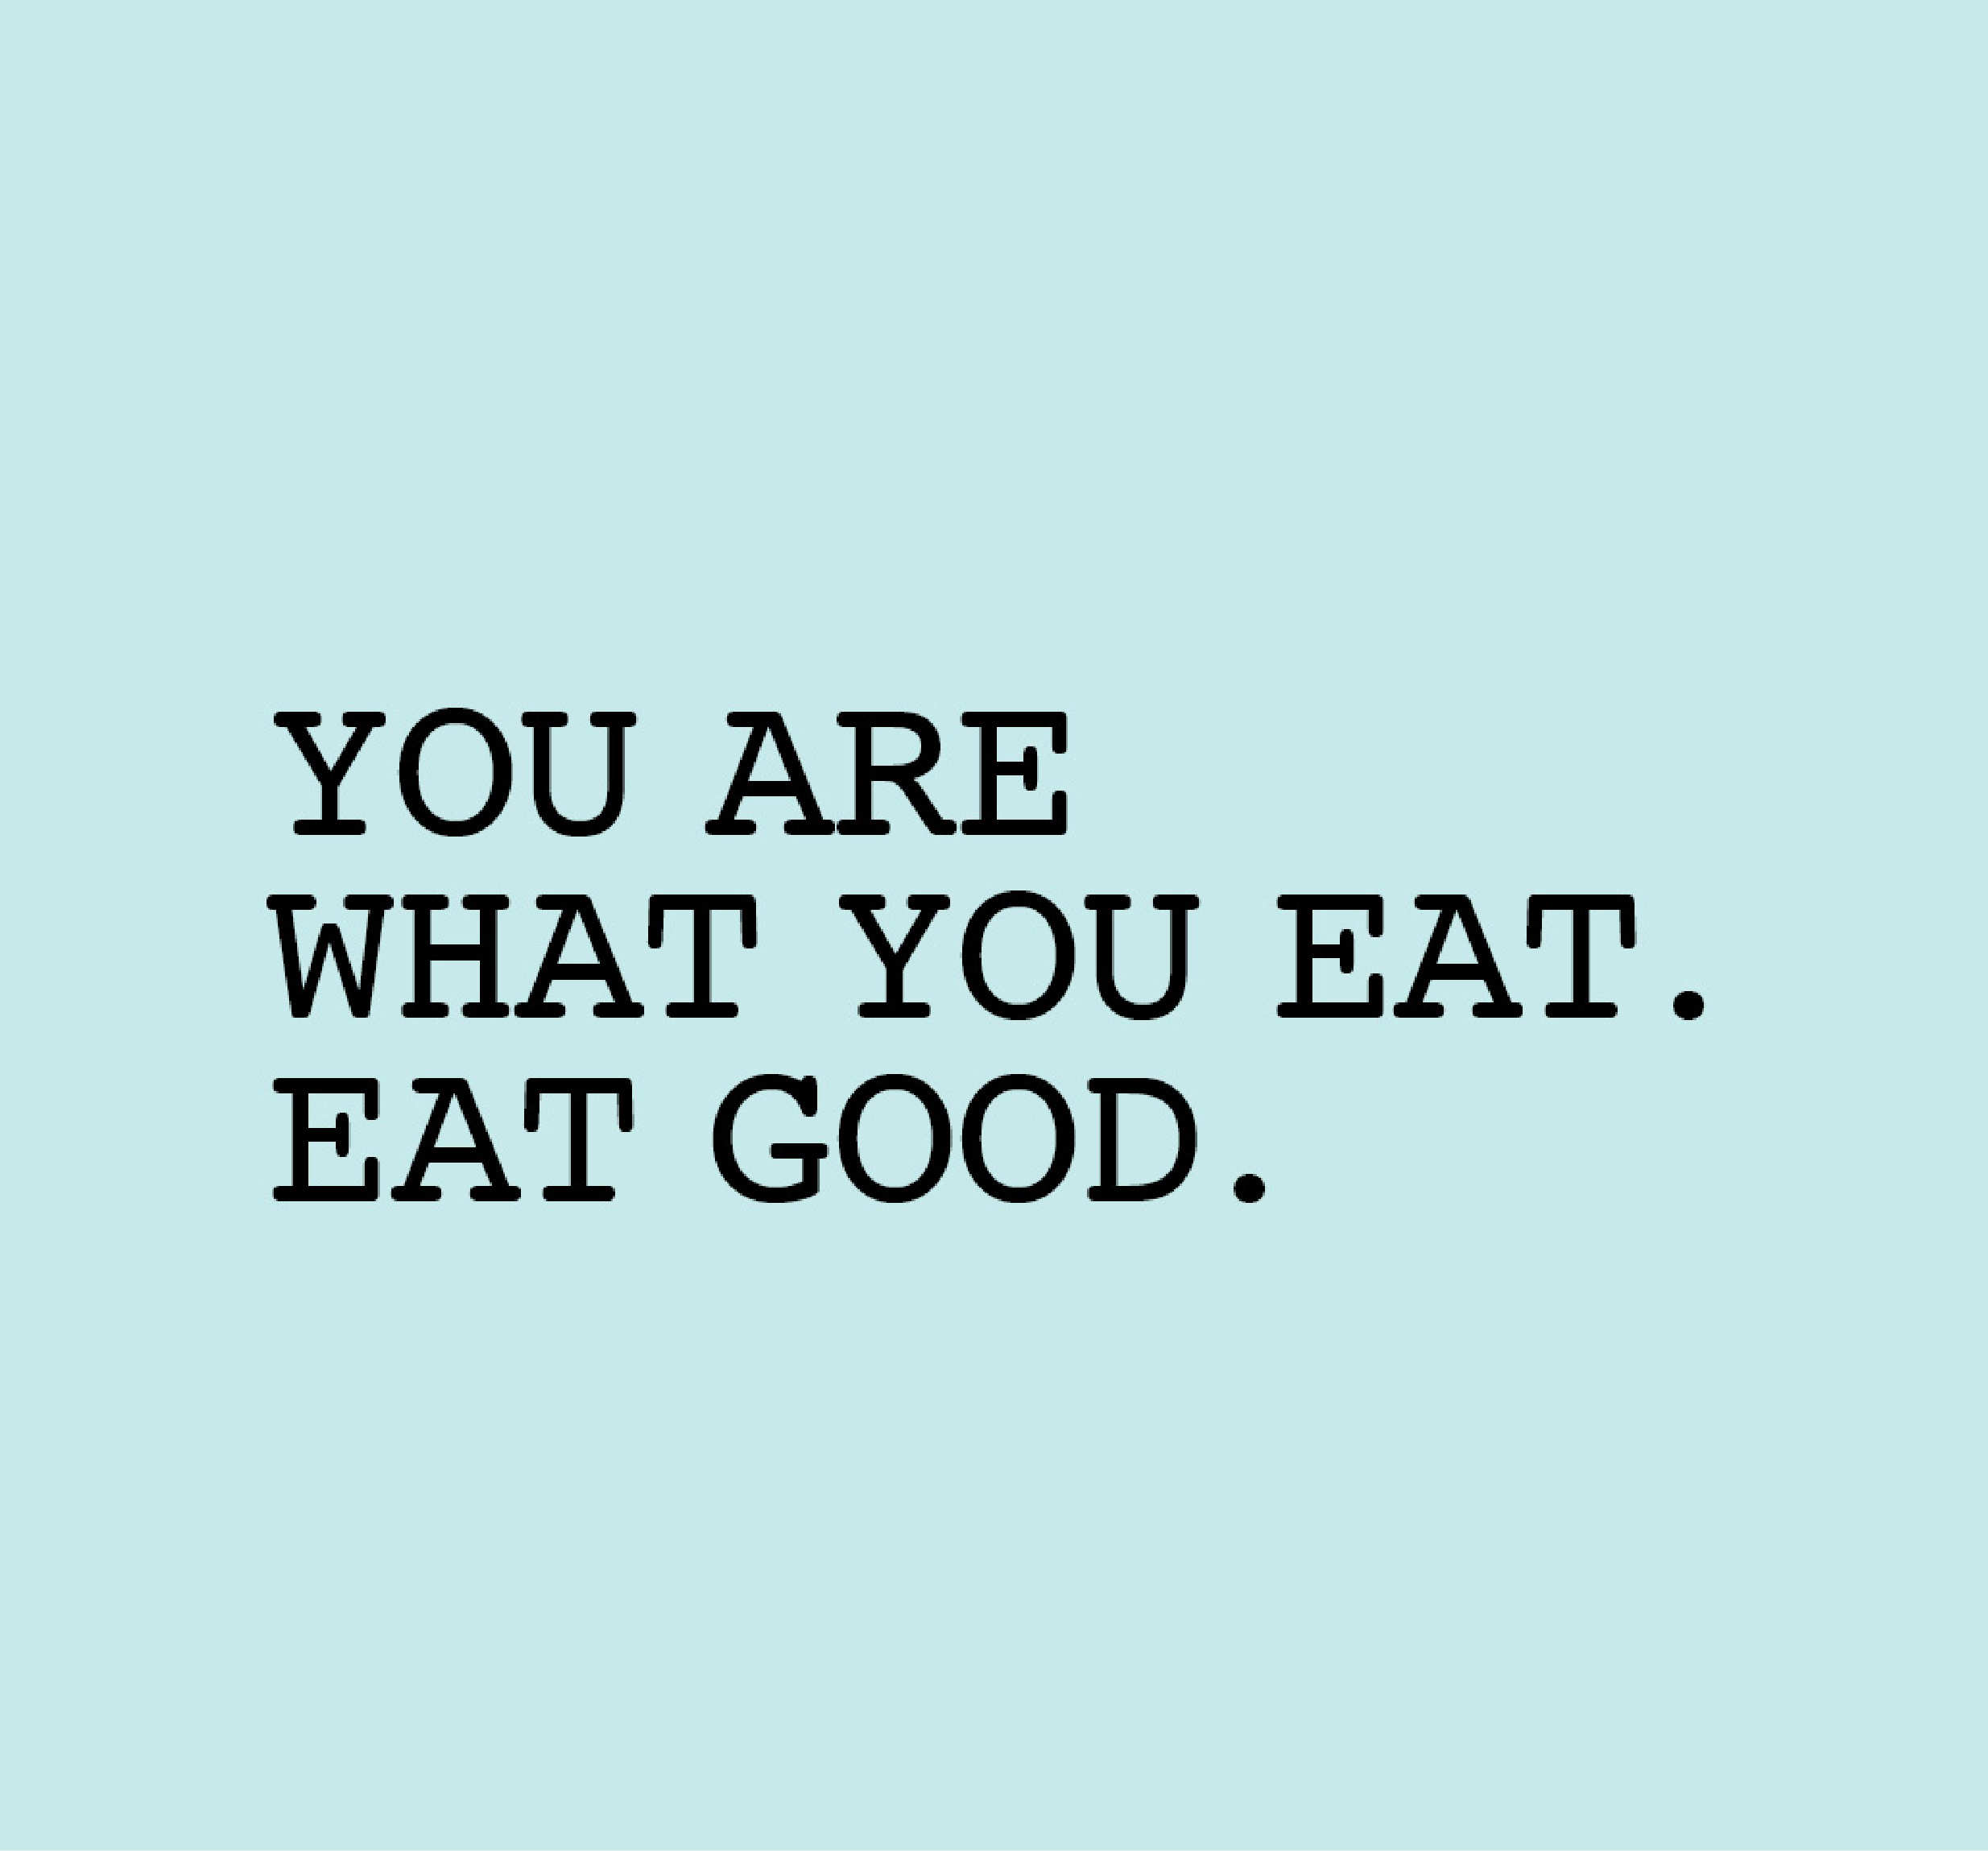 You are what you eat. Eat good. Text on blue background